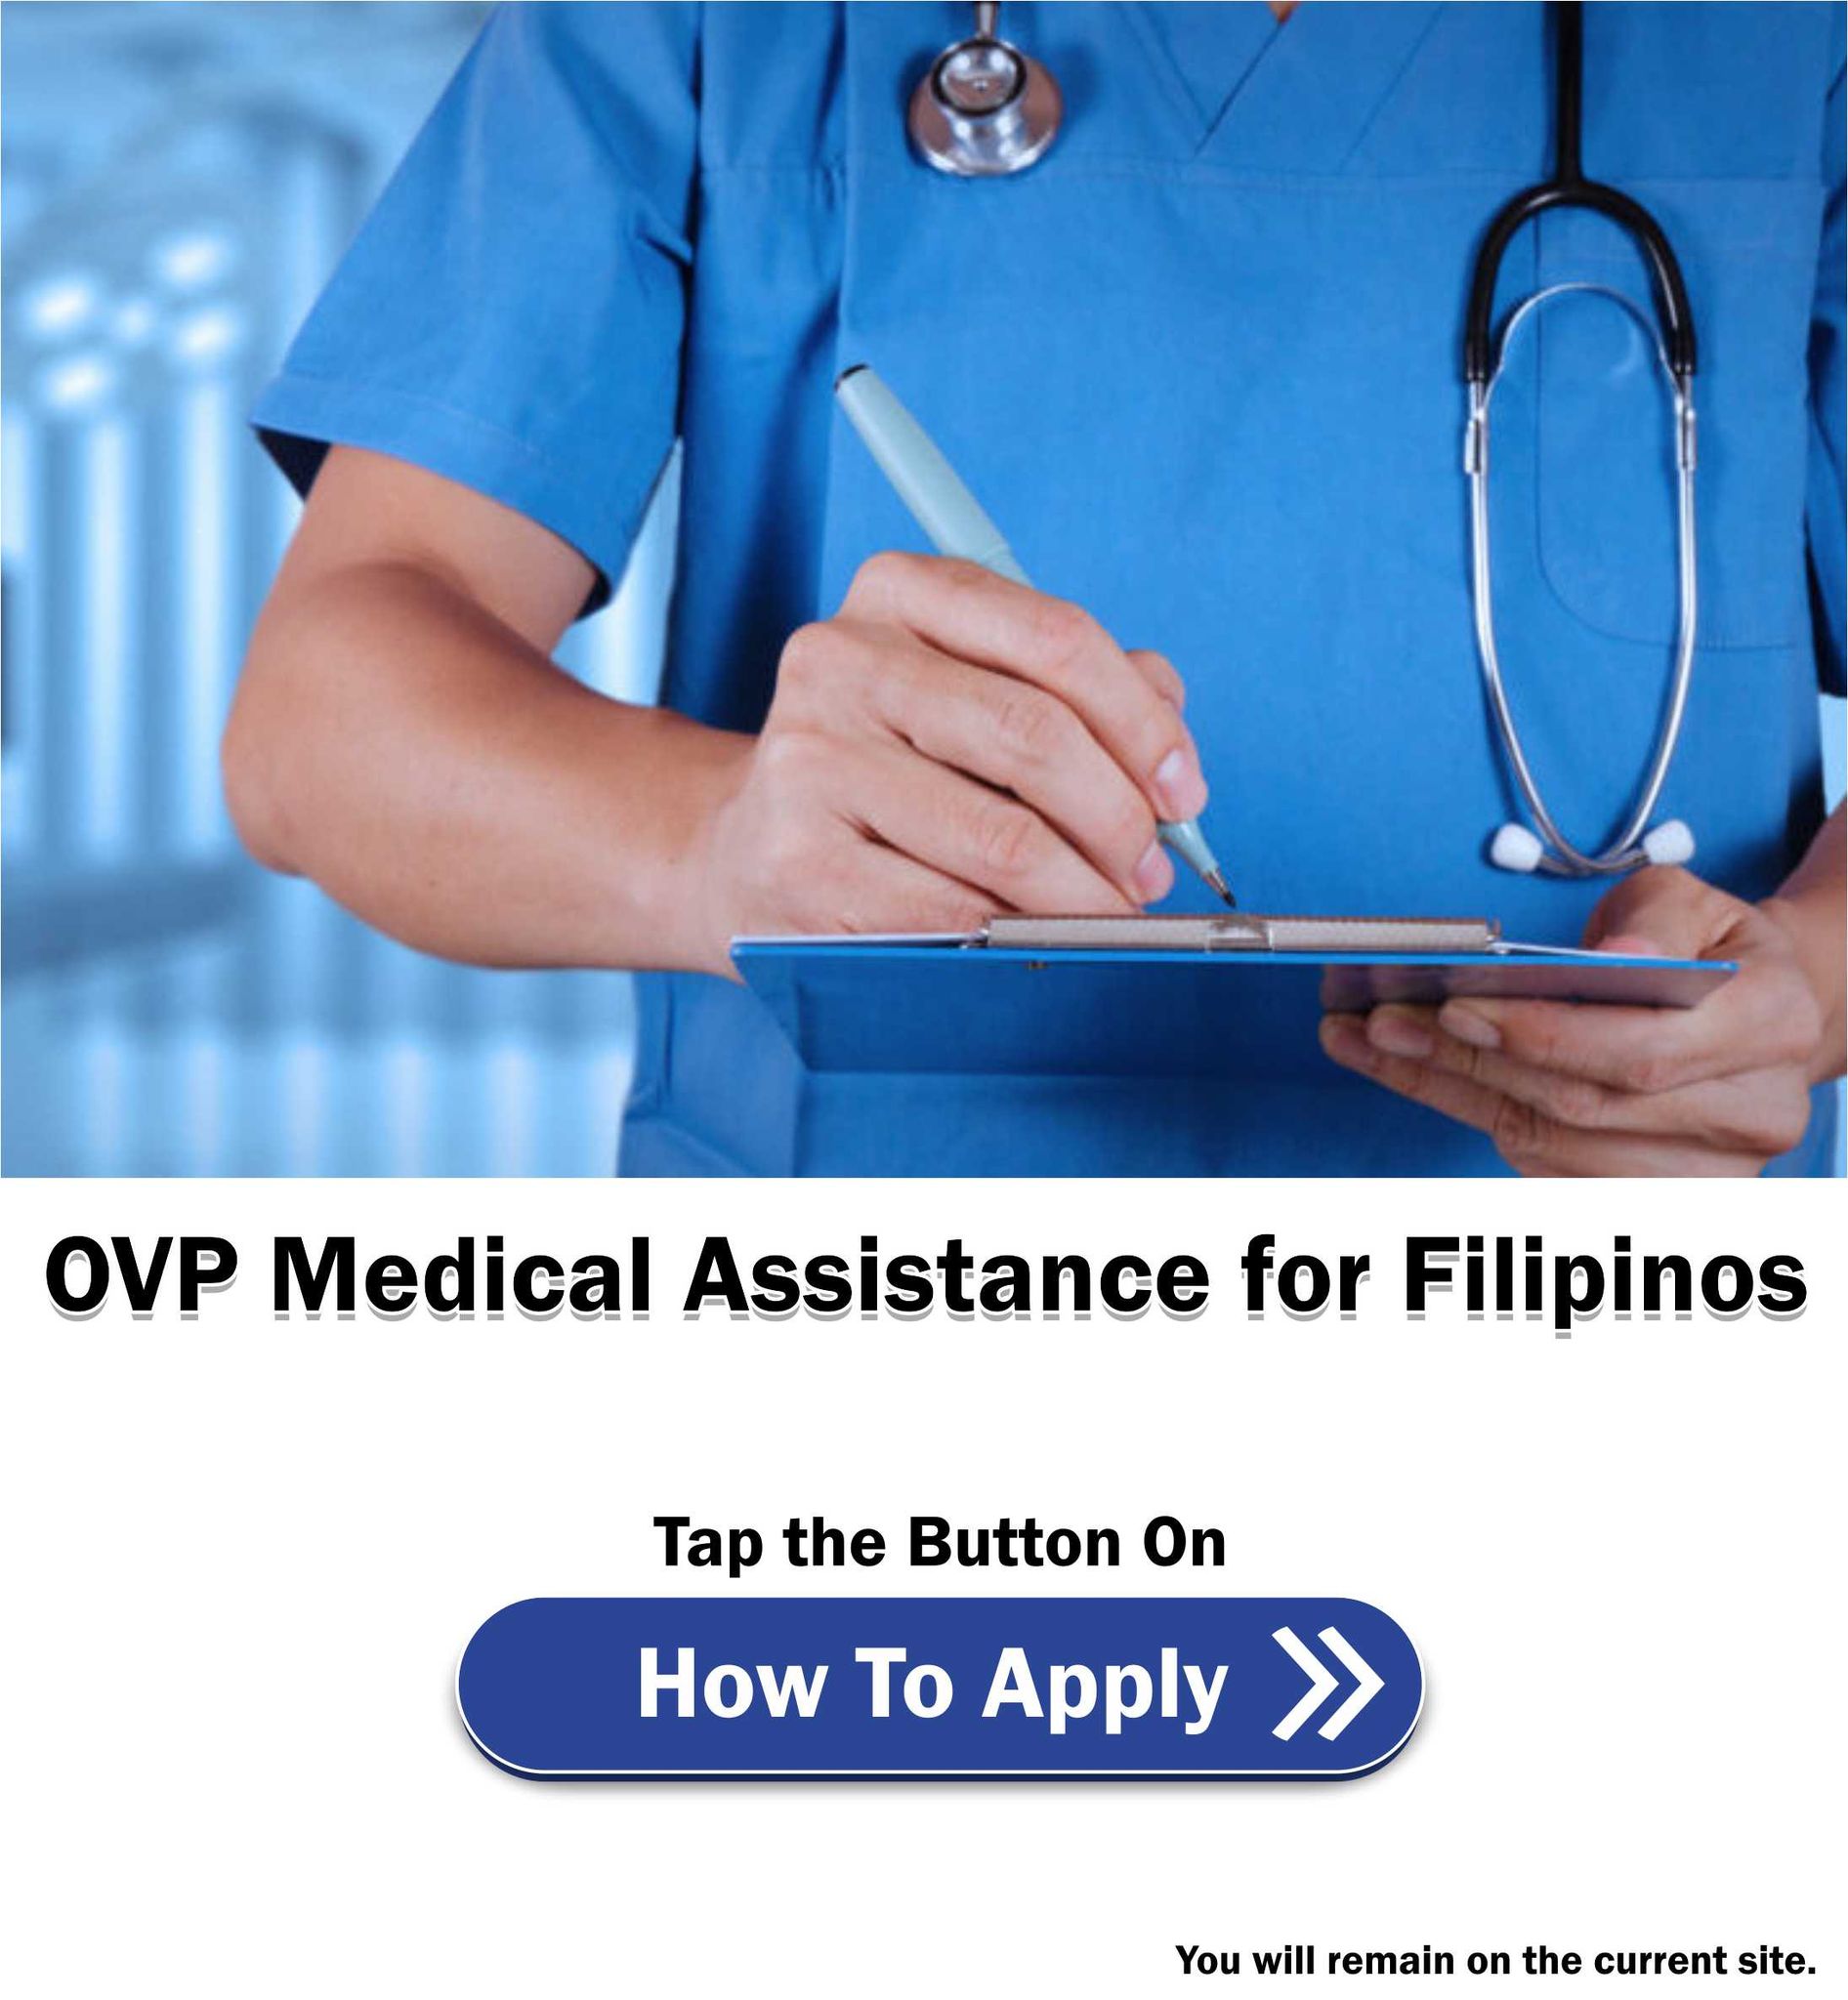 Hospital Patients In Ward May Avail Ovp Medical Assistance Offer Philnews 8139